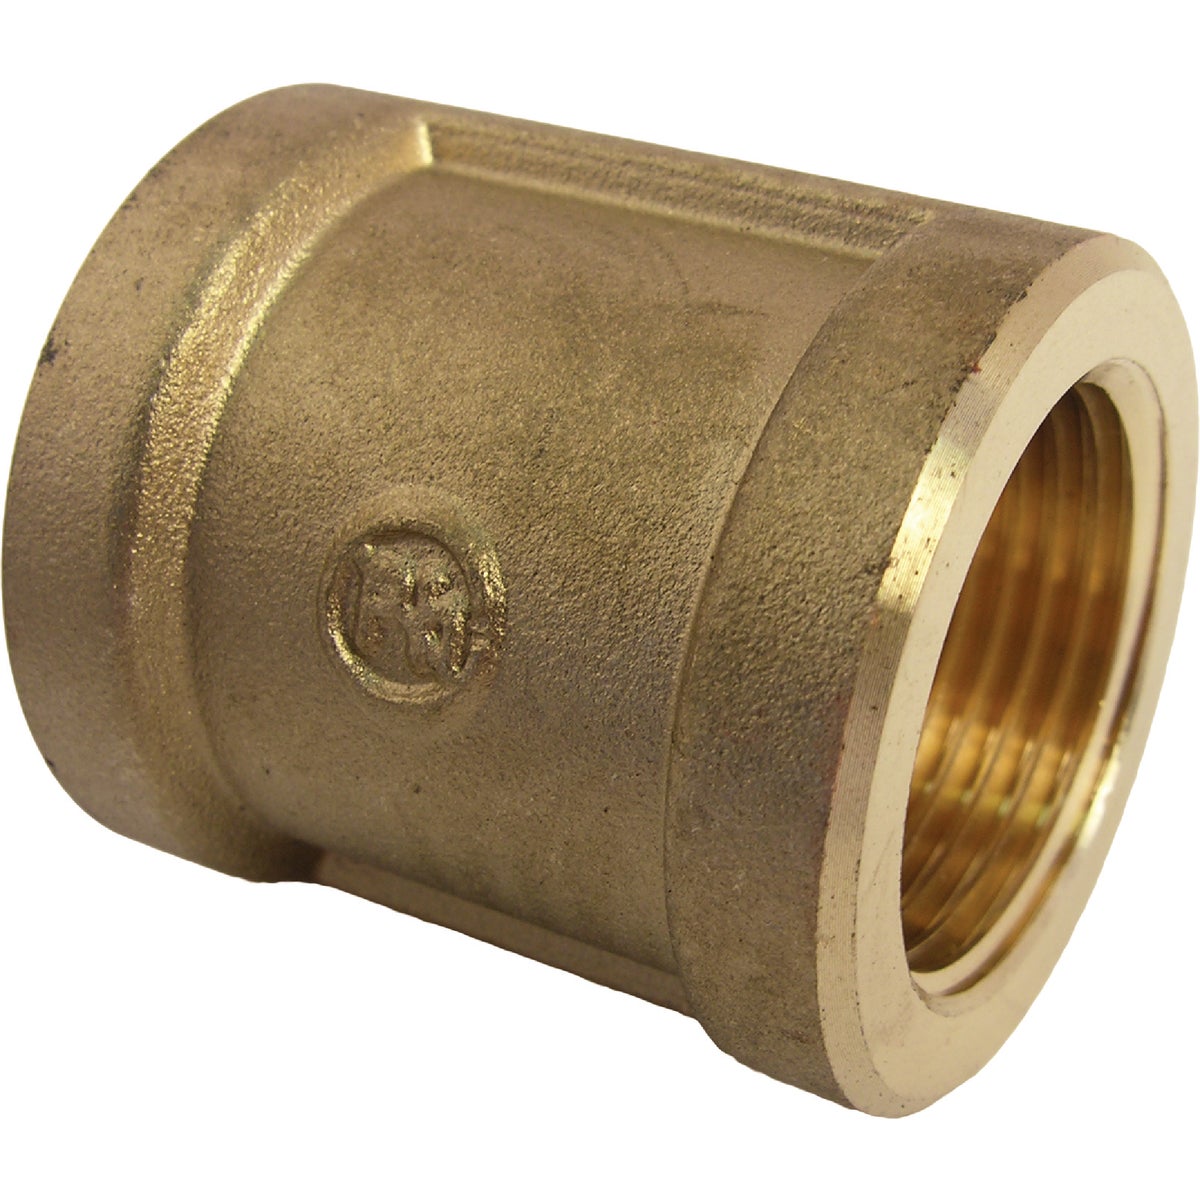 Lasco 3/4 In. FPT x 3/4 In. FPT Red Brass Coupling